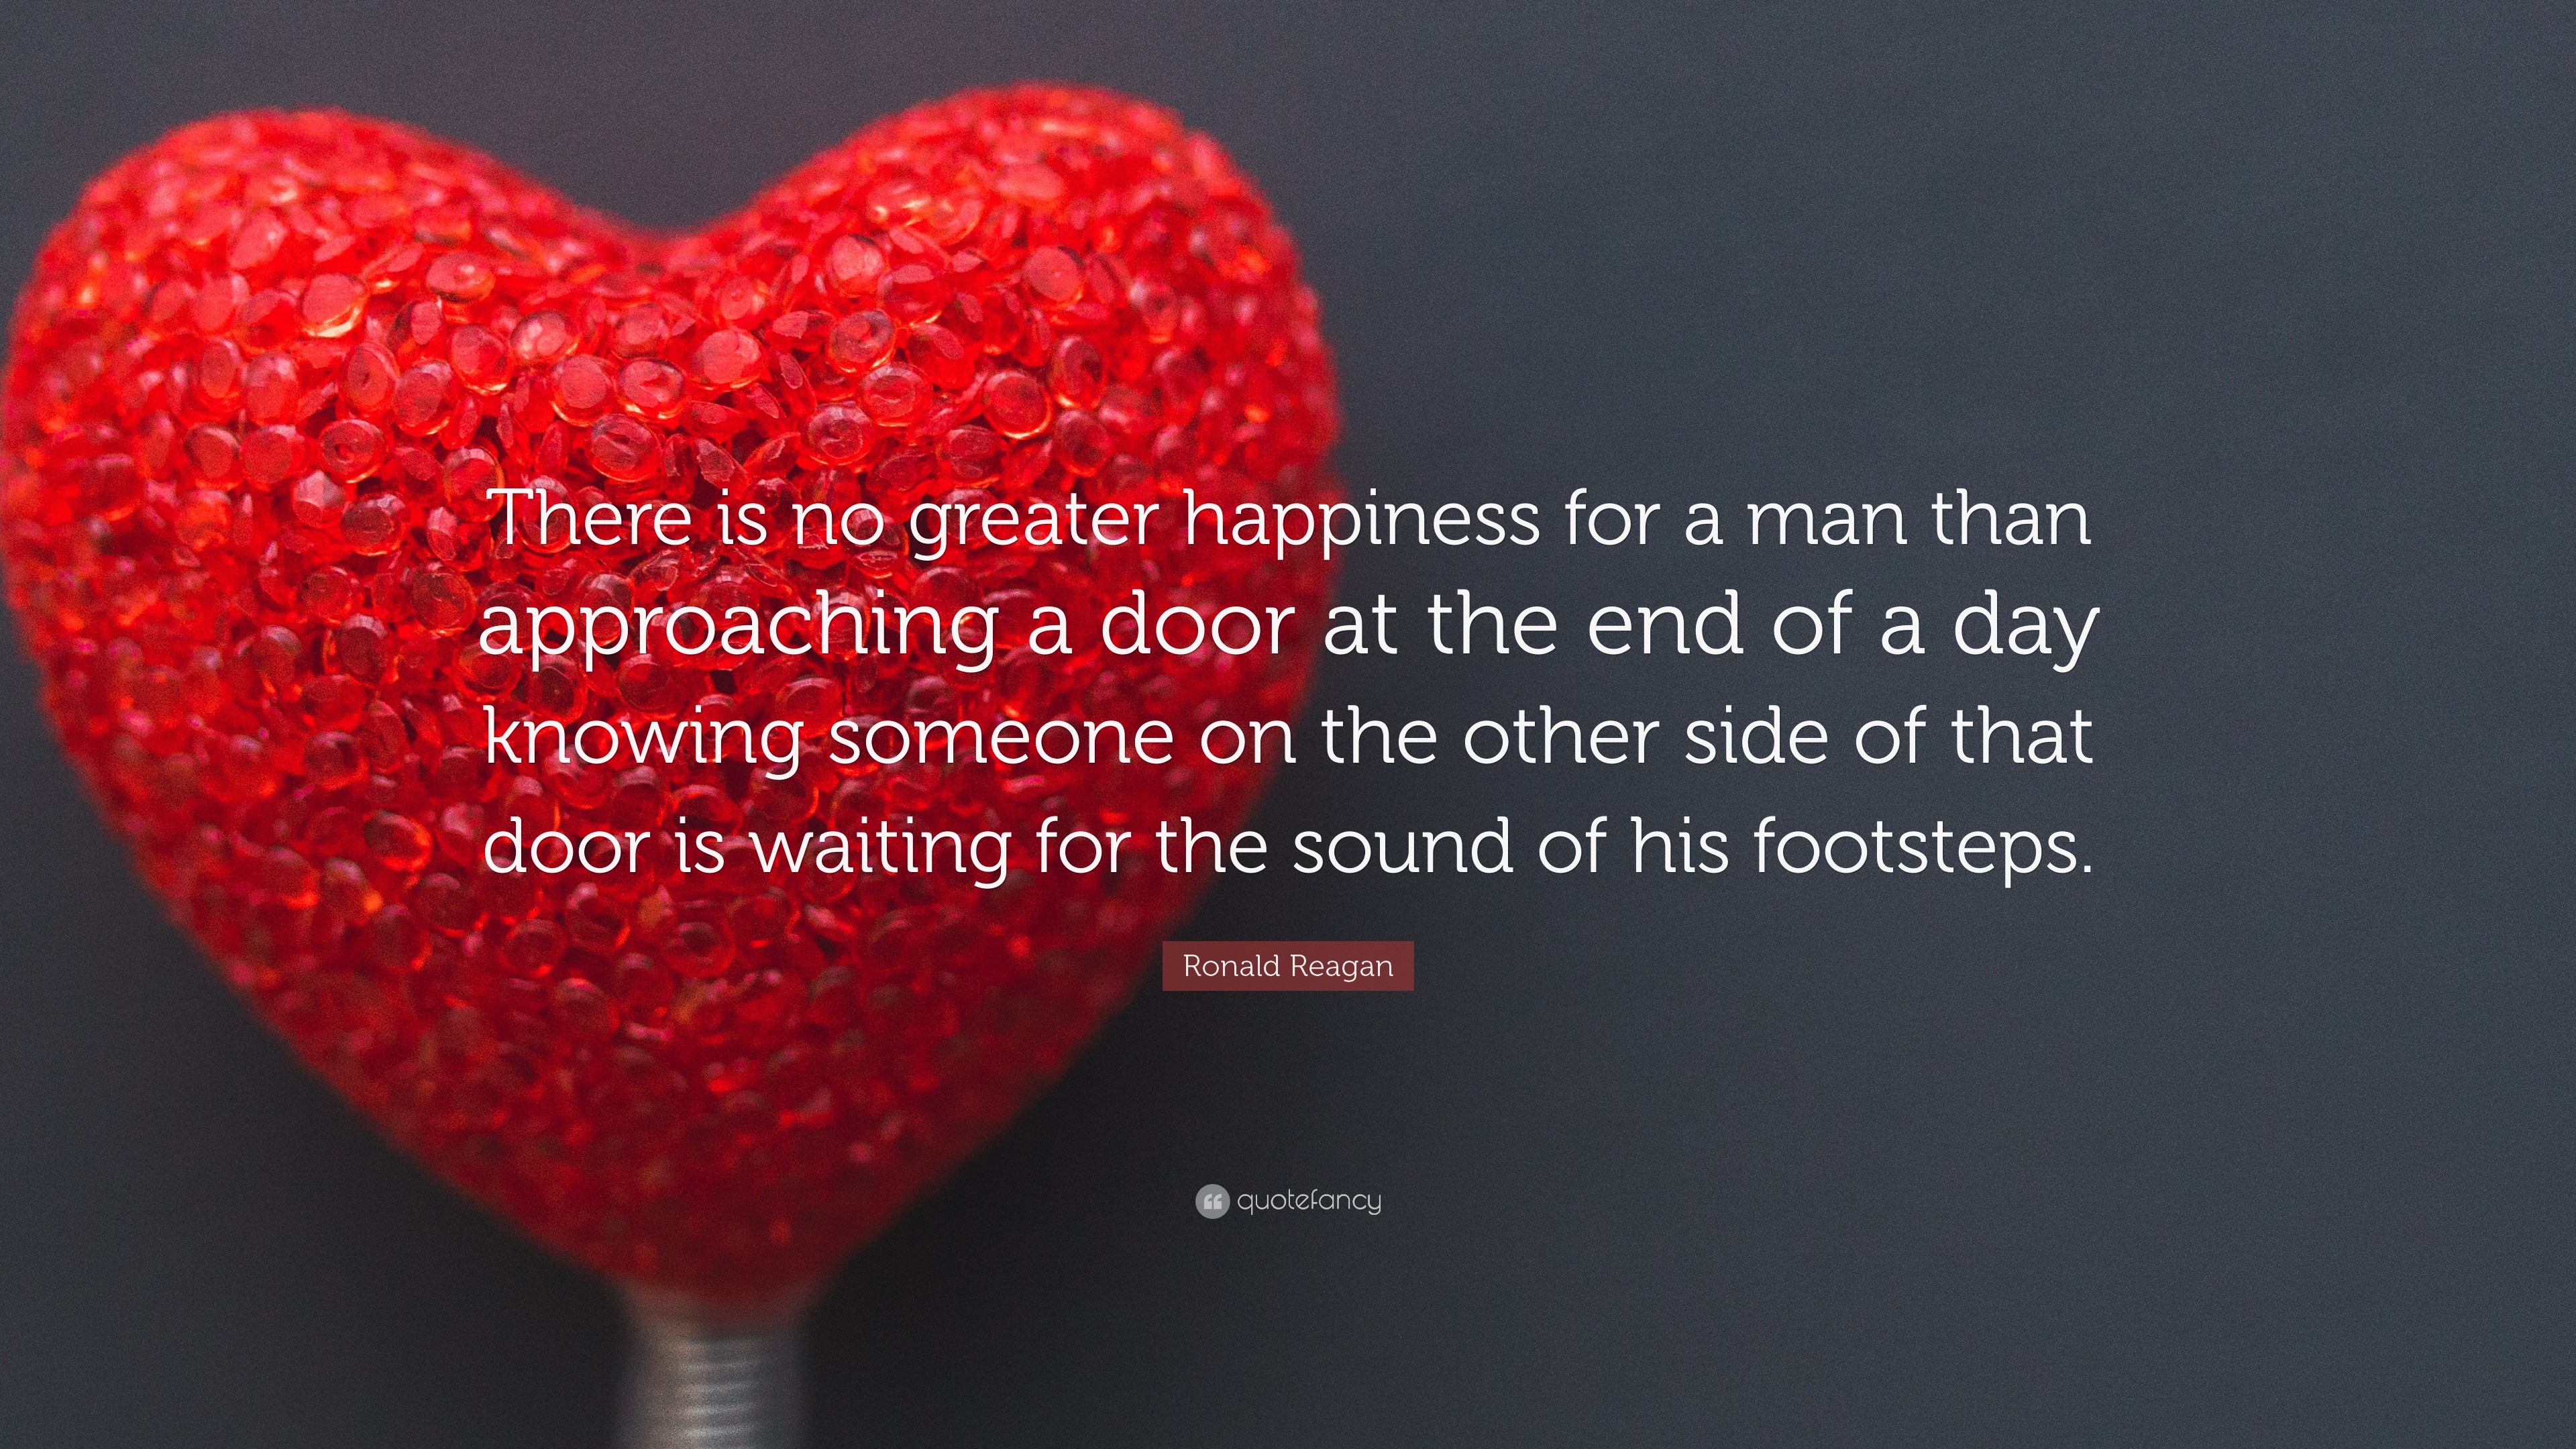 Ronald Reagan Quote: “There is no greater happiness for a man than ...